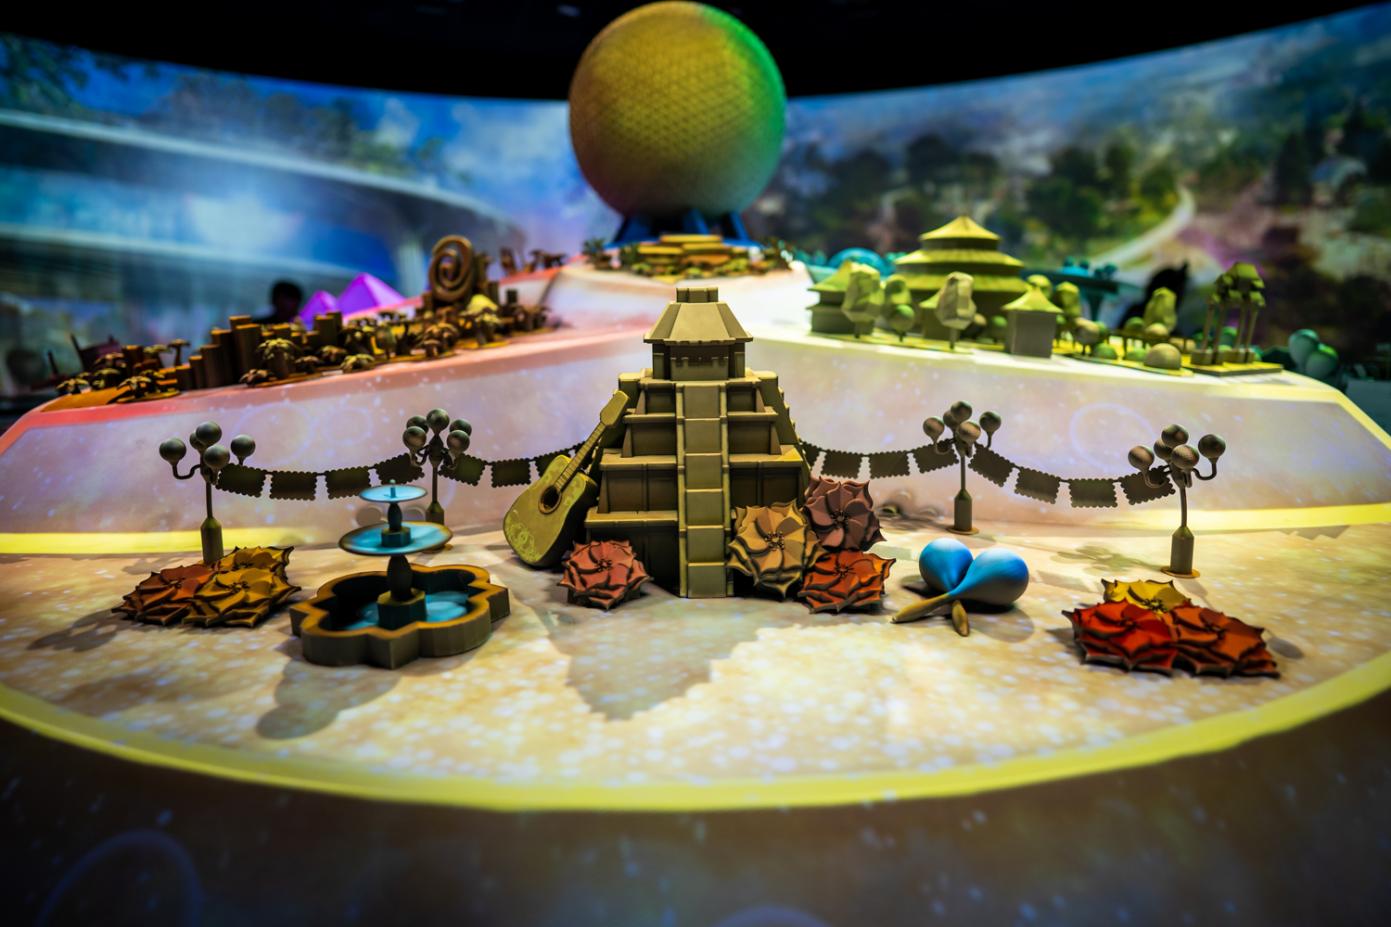 Mexico pavilion on epcot experience model